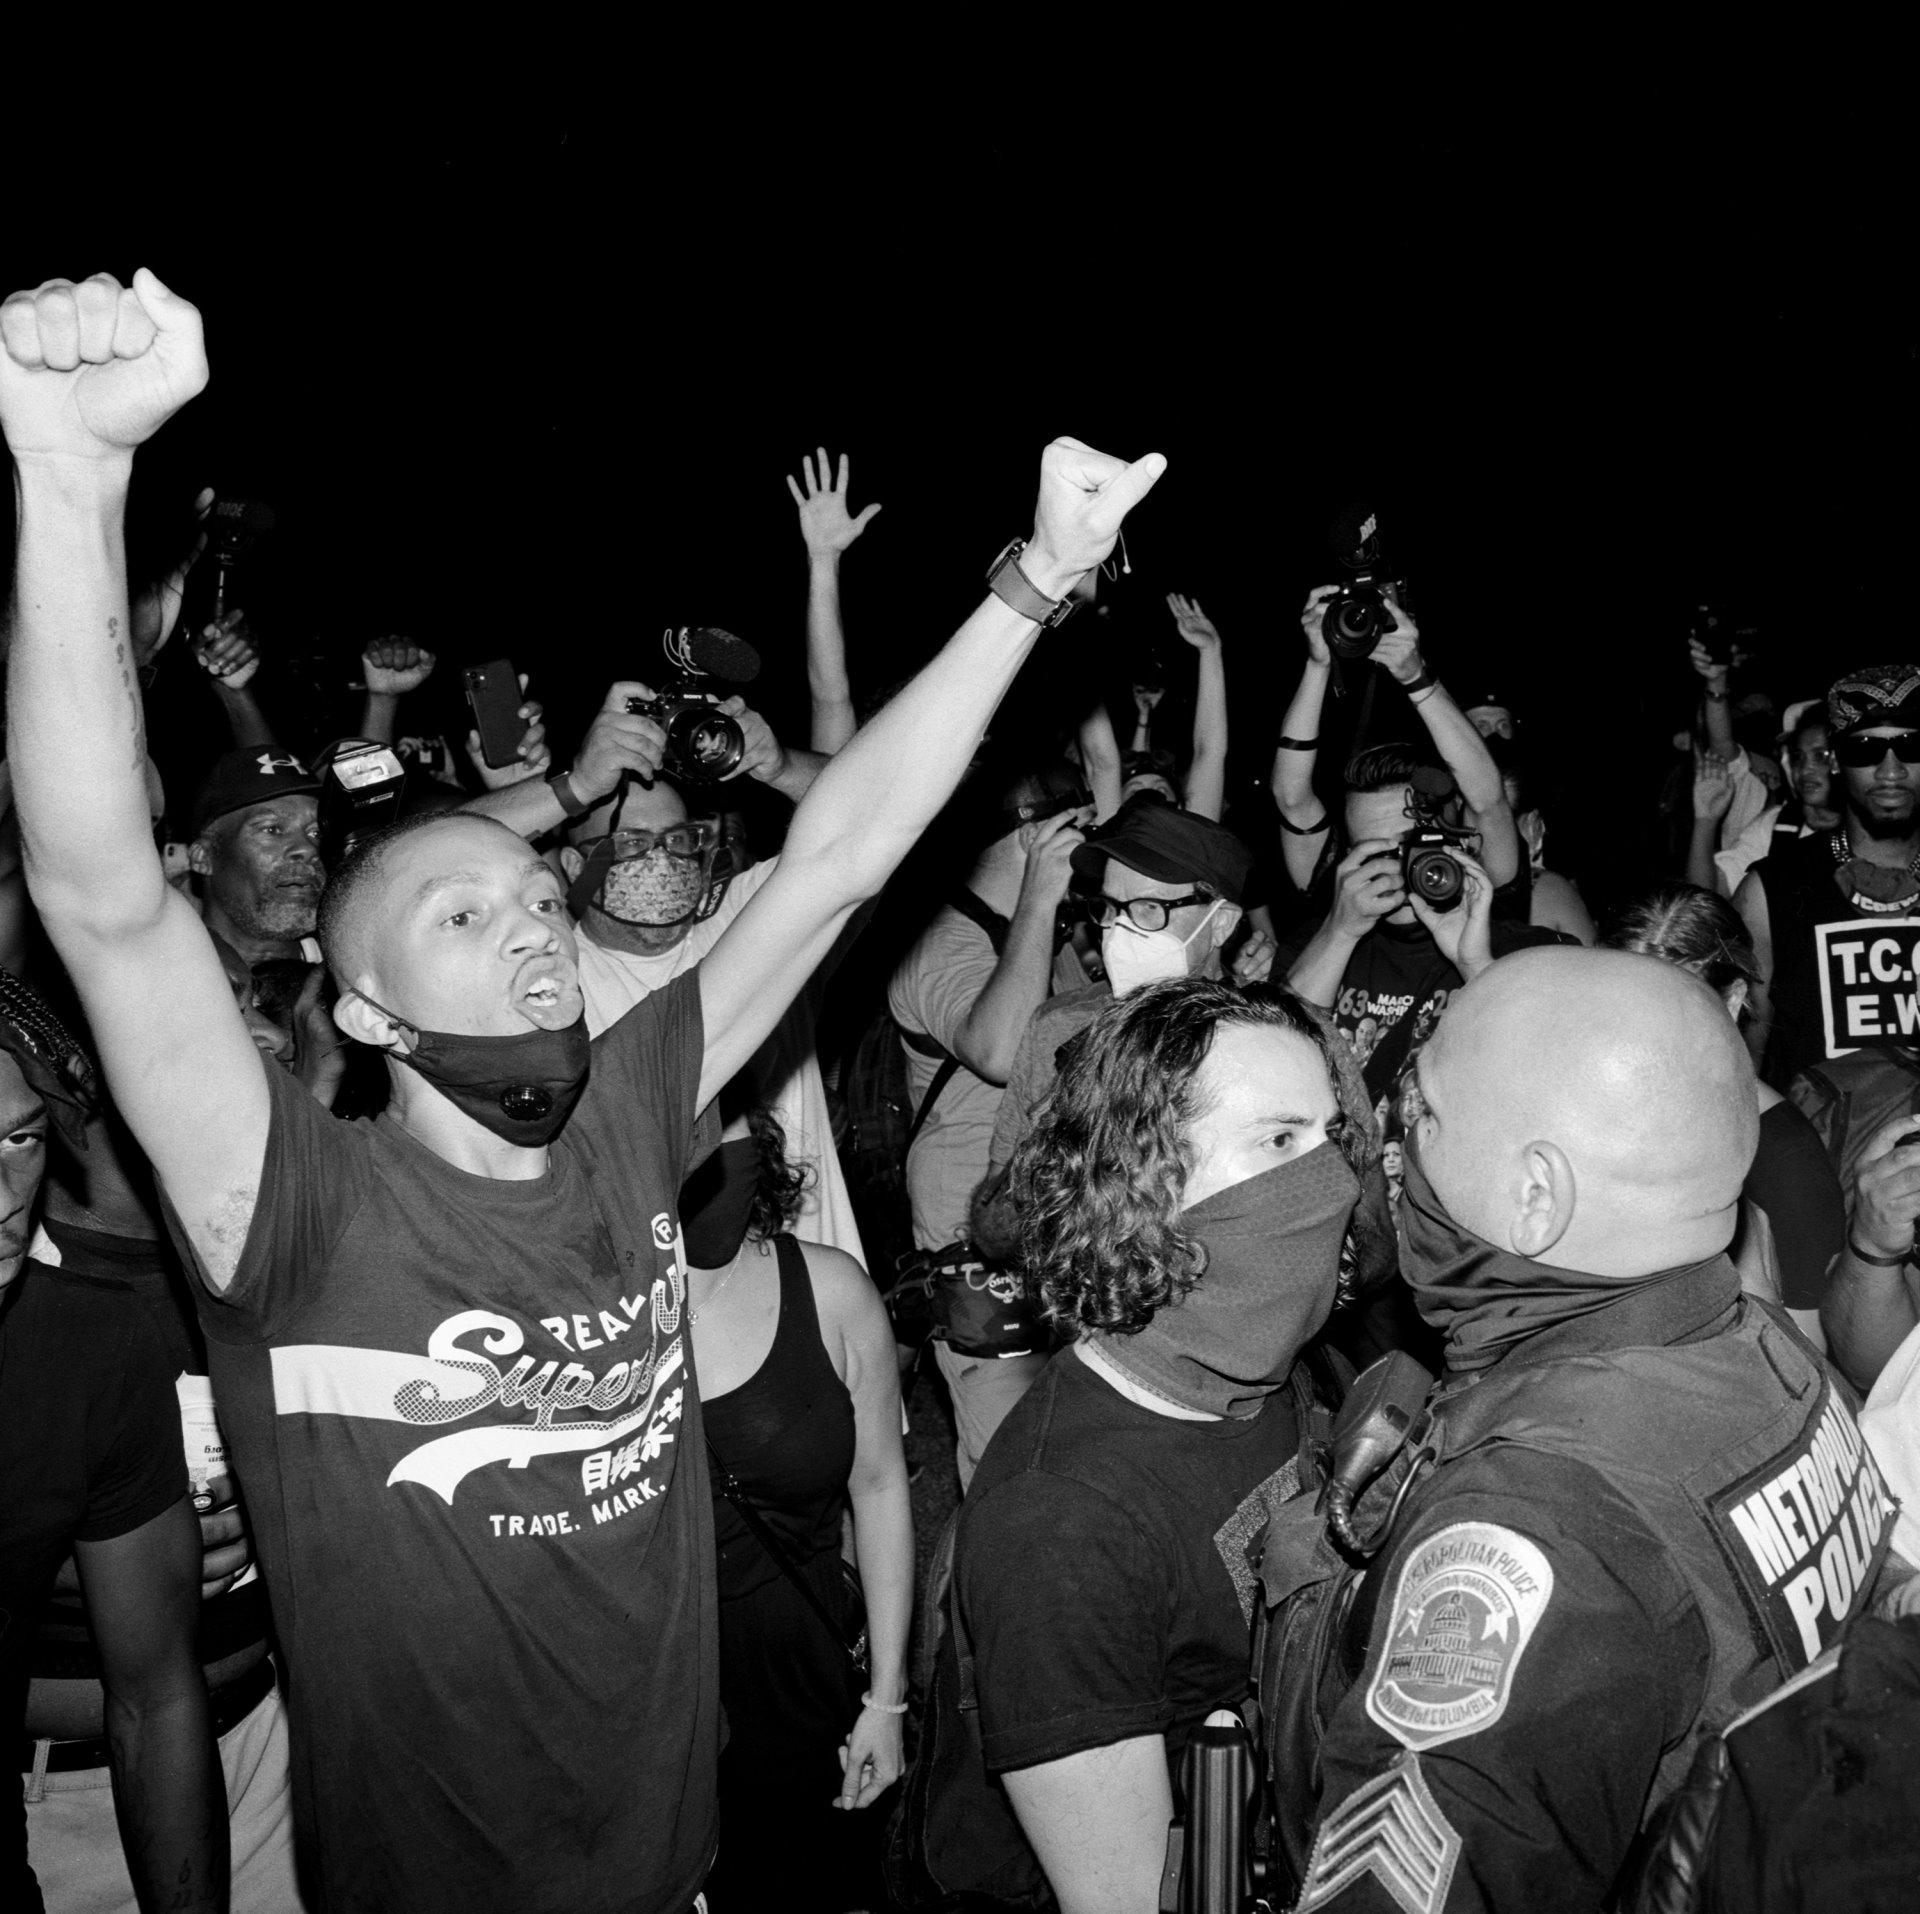 Protesters confront police during a &lsquo;Trump/Pence Out Now&rsquo; rally at Black Lives Matter Plaza, a two-block-long pedestrian section of 16th Street NW in downtown Washington, renamed in June 2020. That night, Trump, breaking a longstanding norm against using federal property for political purposes, accepted the Republican party nomination for president on the South Lawn of the White House.